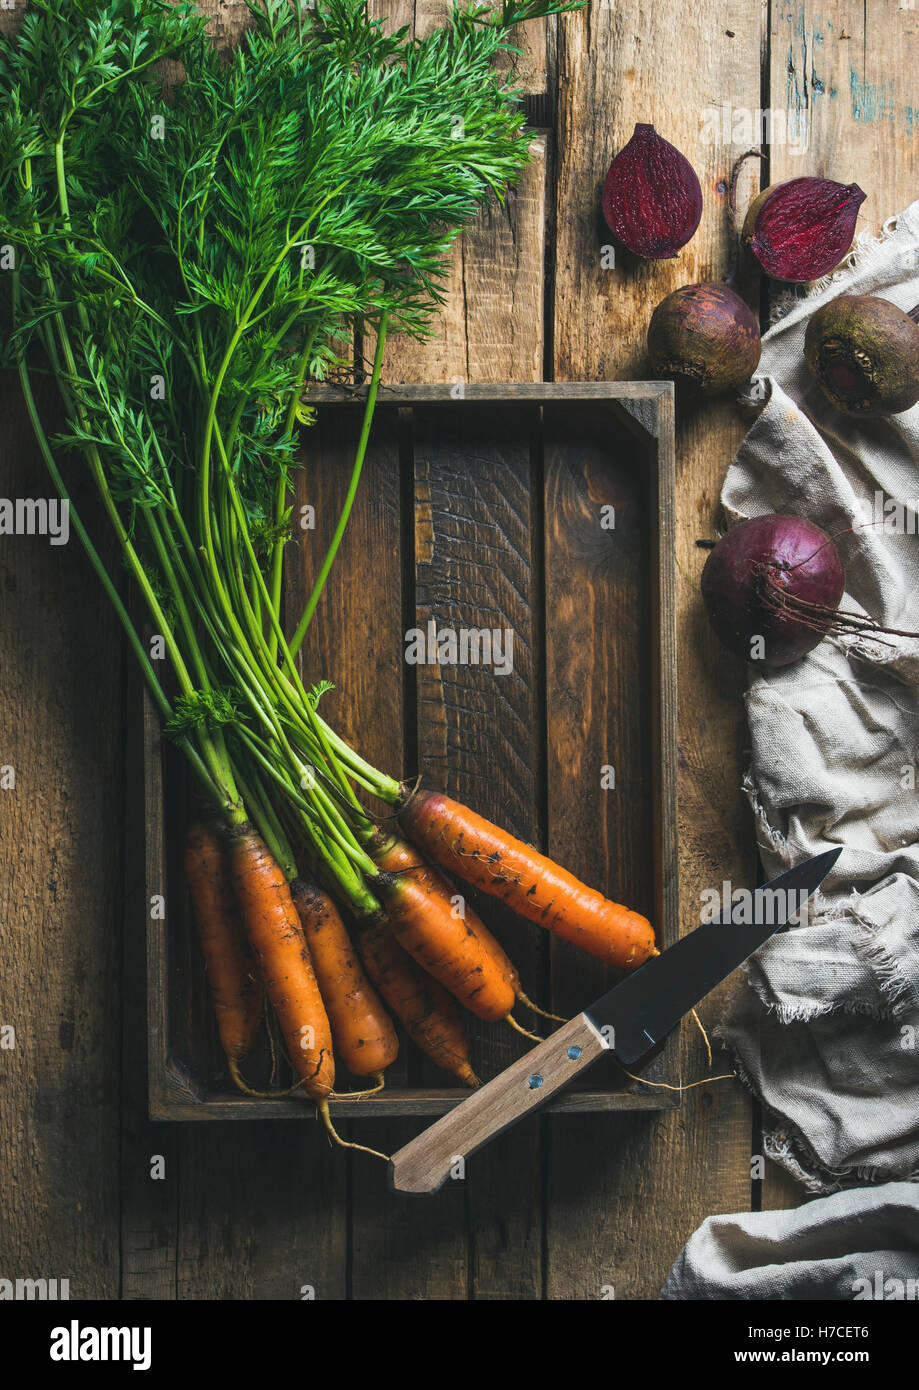 Healthy food cooking background. Vegetable ingredients. Fresh garden carrots and beetroots in wooden tray over rustic wooden bac Stock Photo